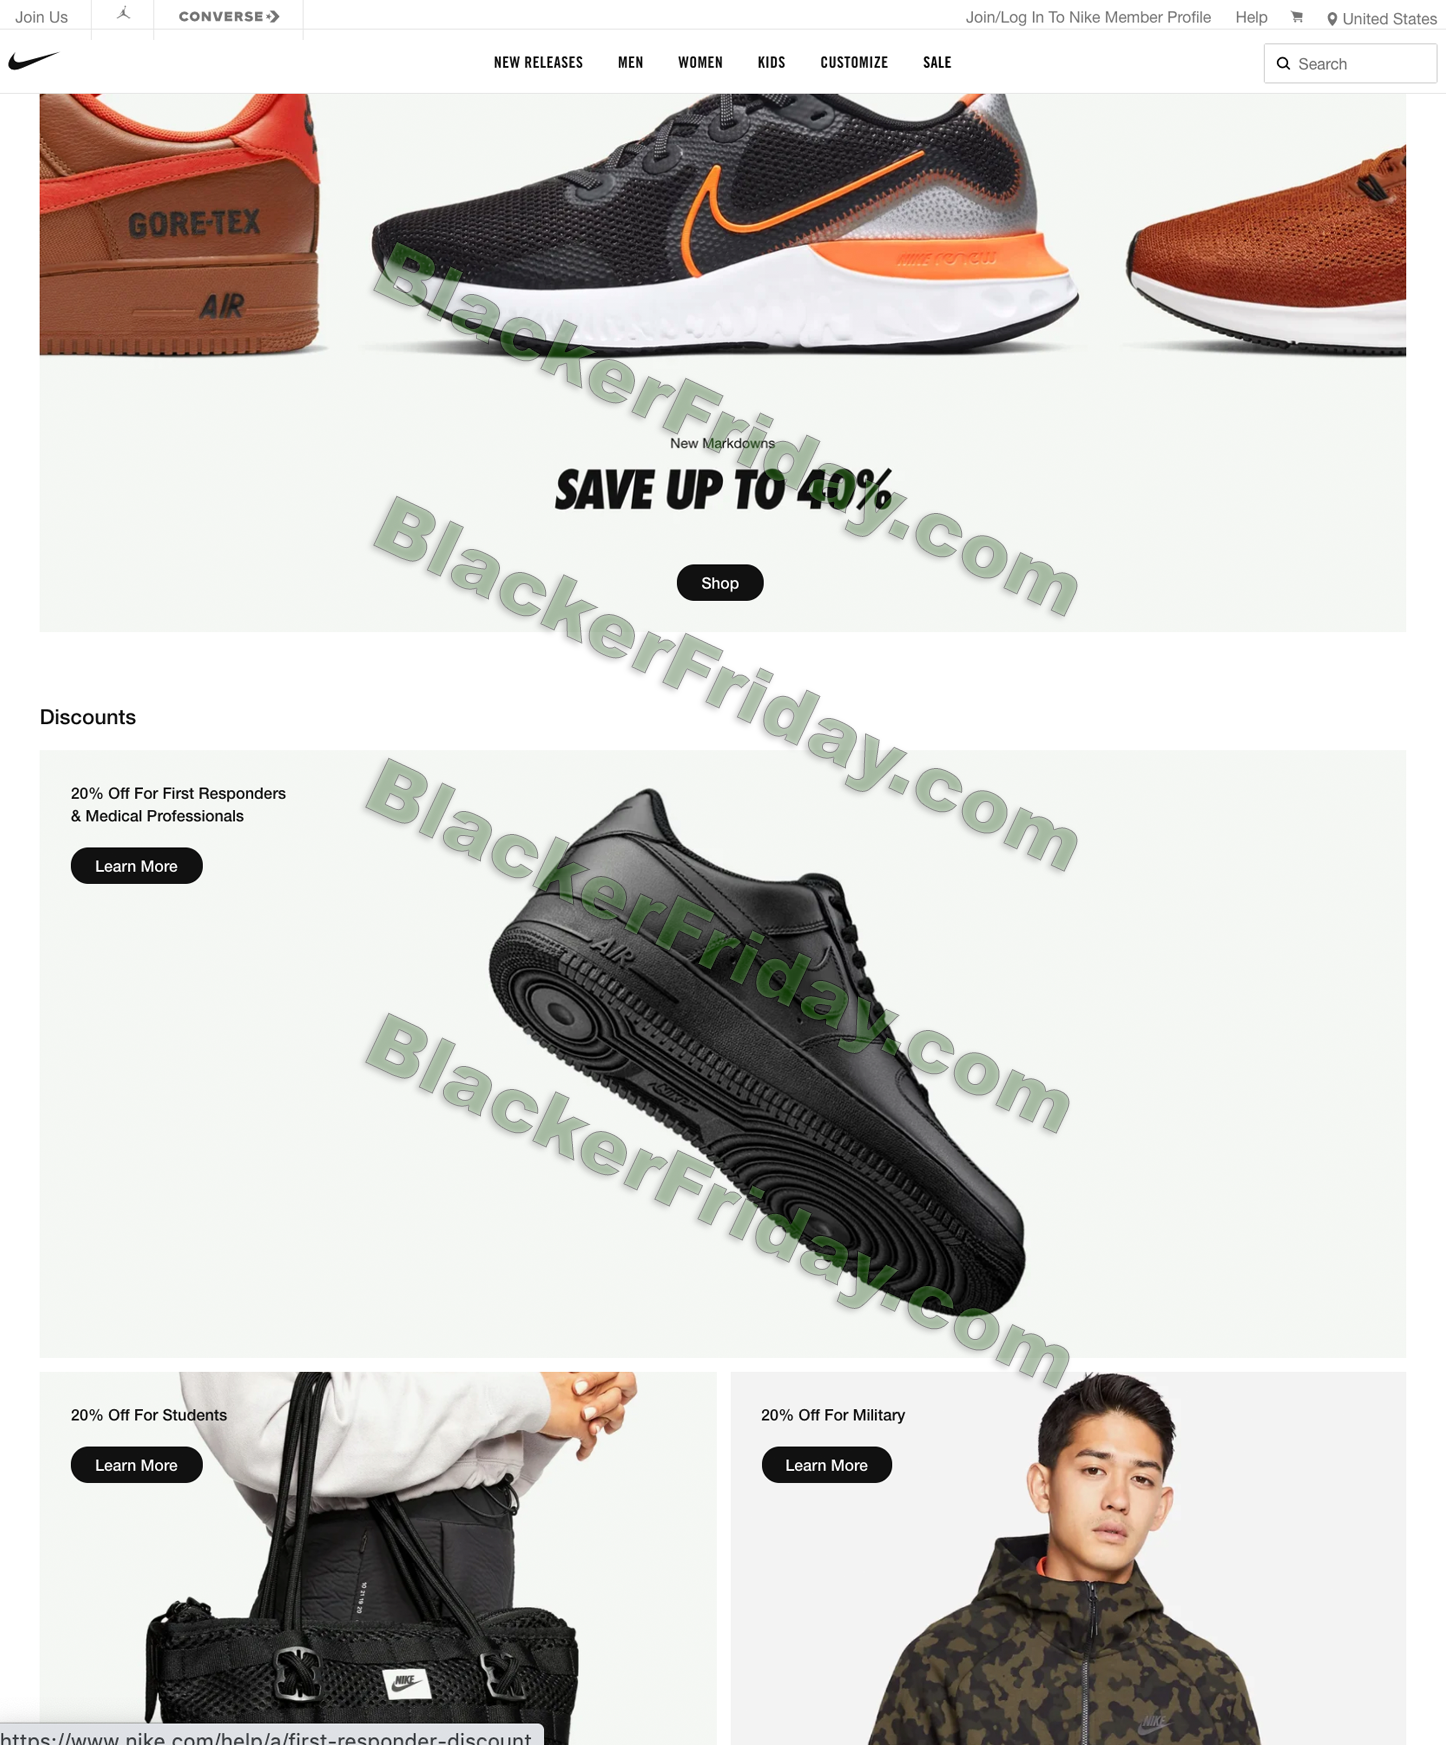 Nike Labor Day Sale 2020 - What to 